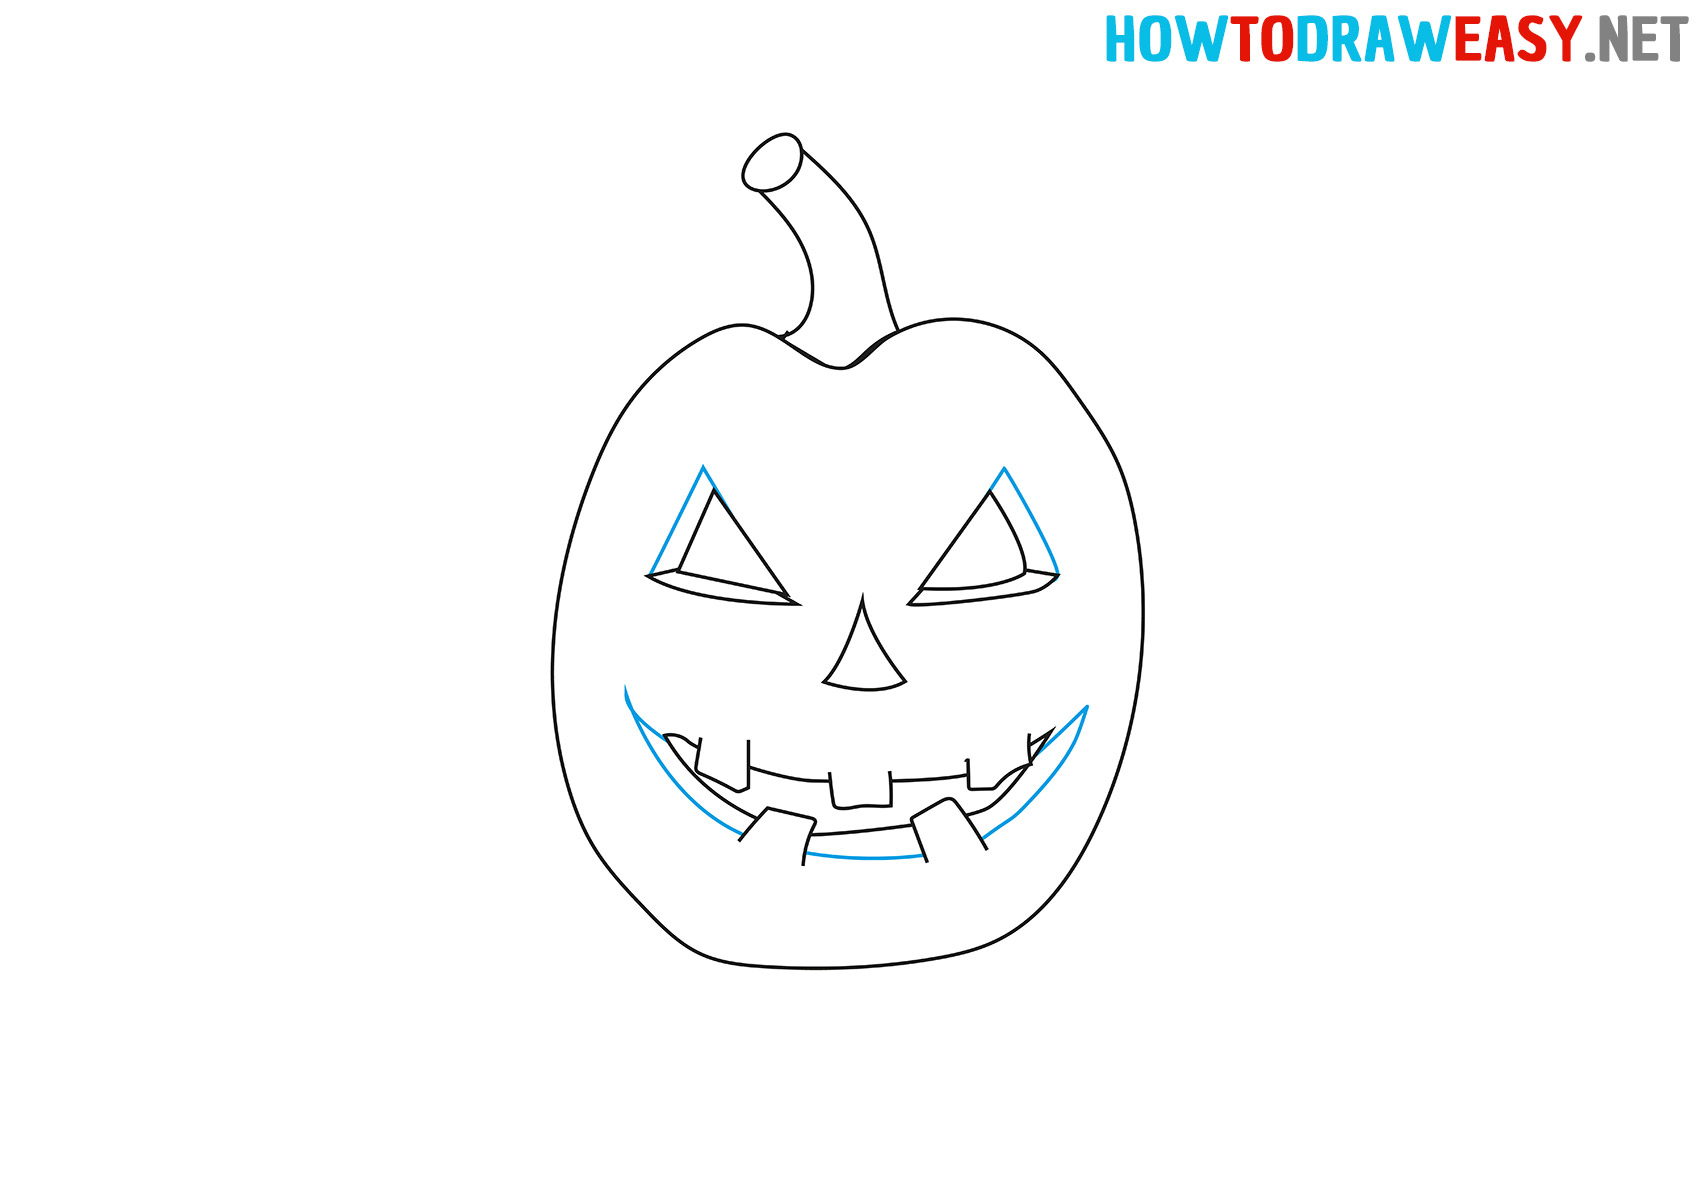 How to Draw a Simple Halloween Pumpkin